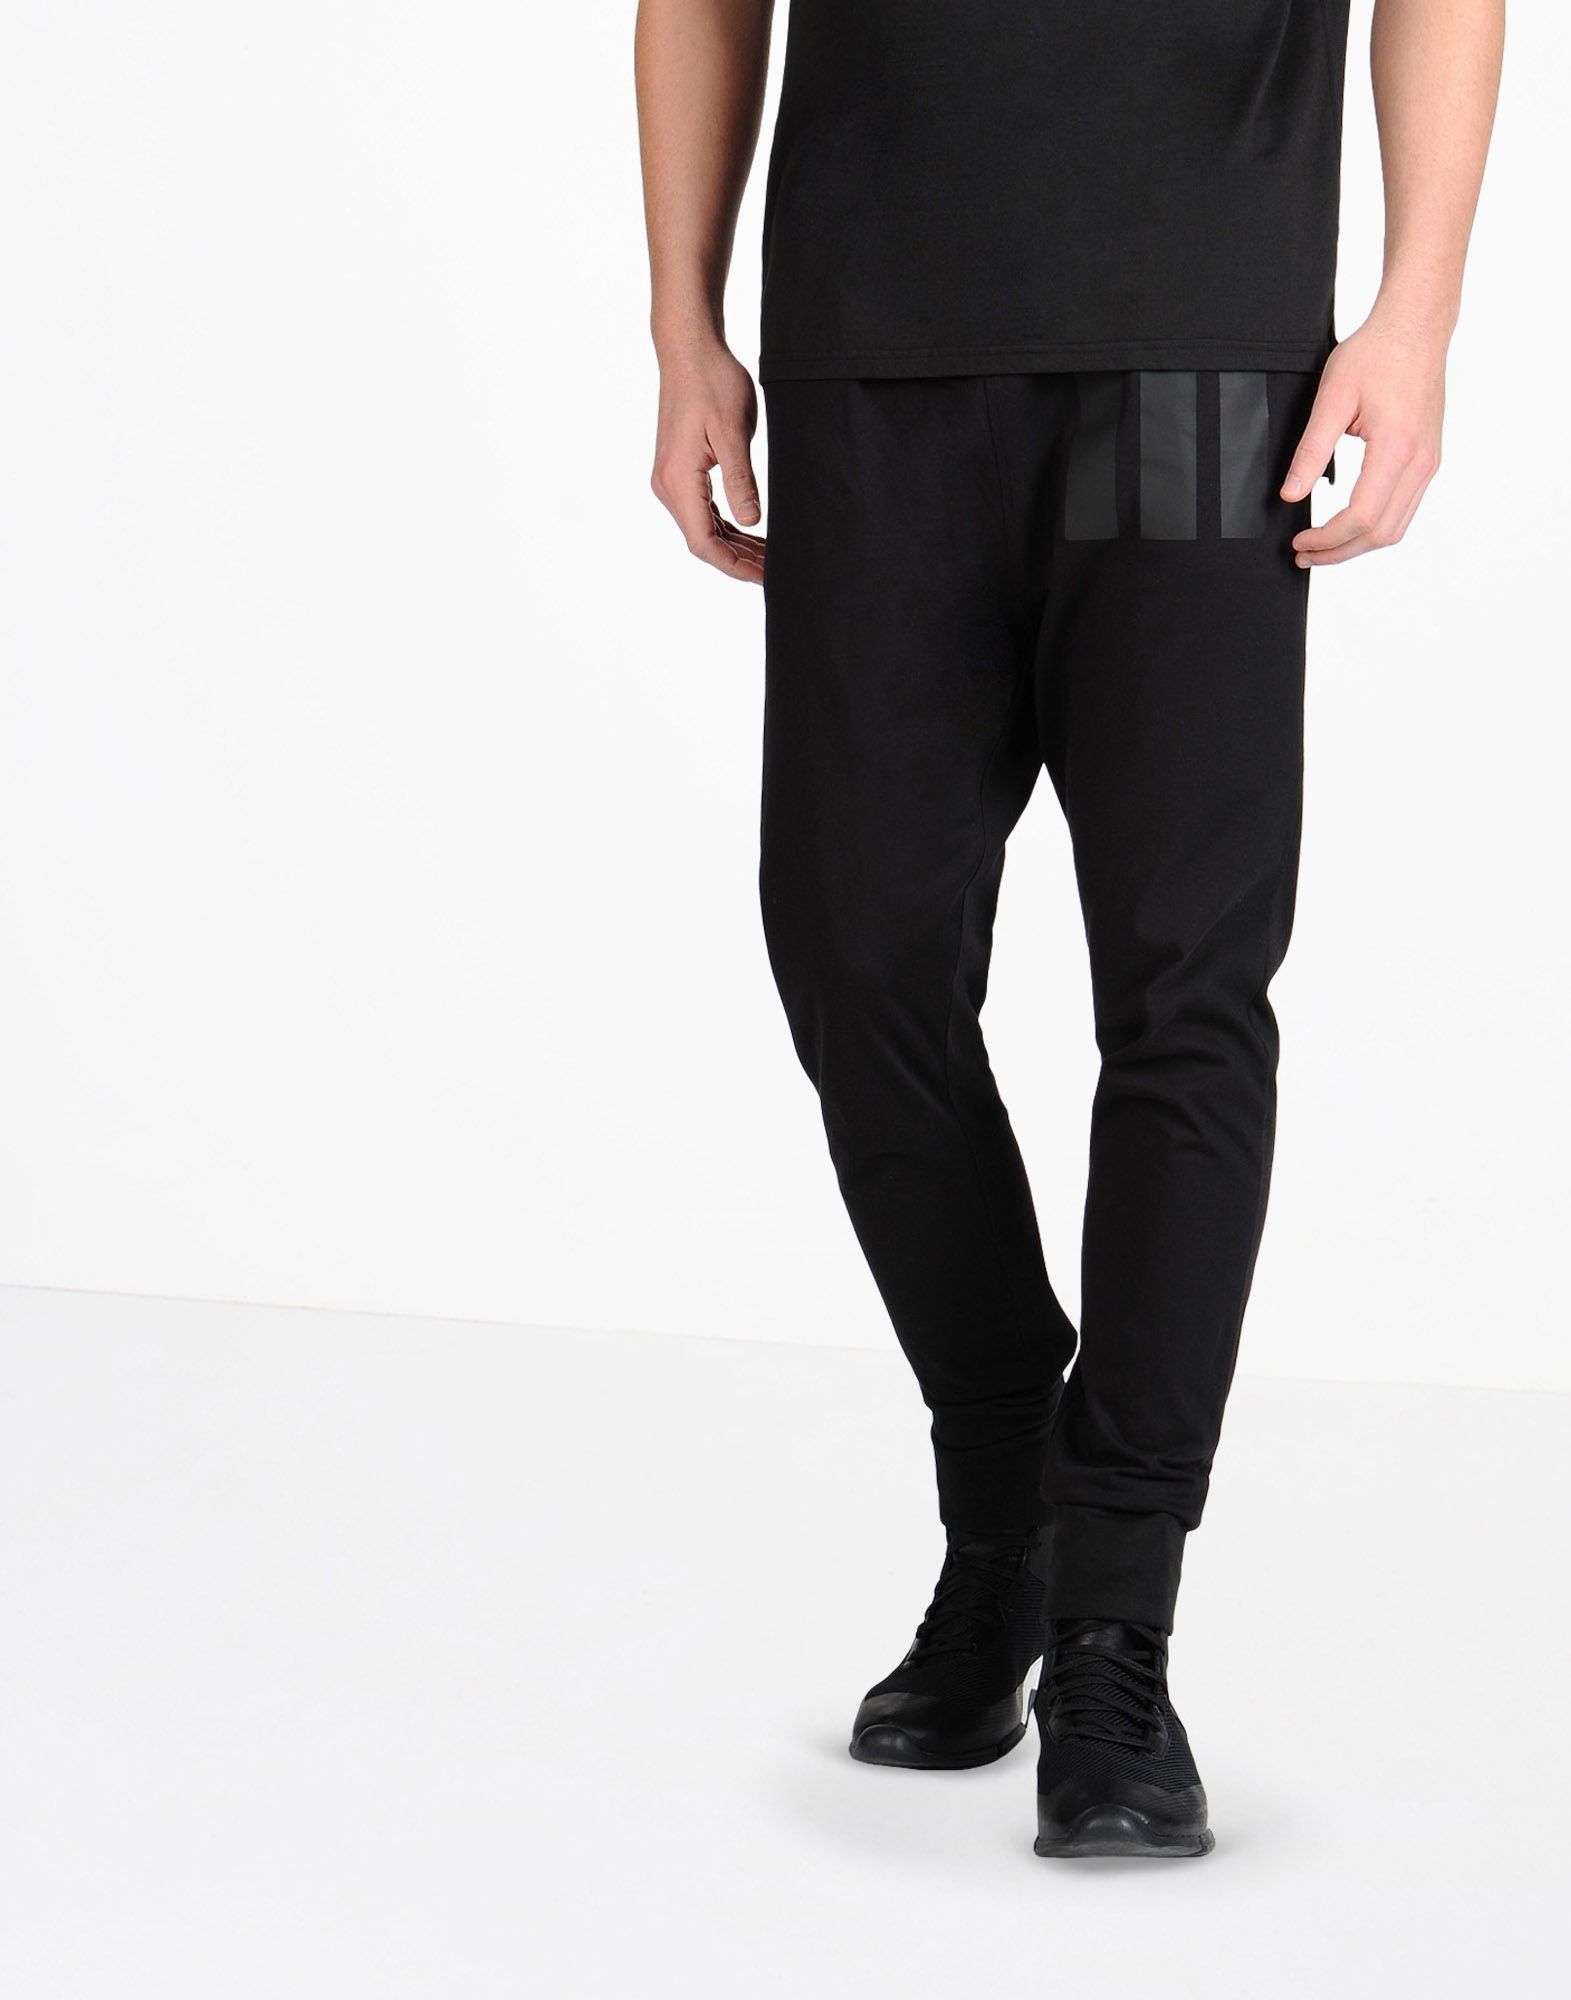 Y 3 3S LONG JOHN for Men | Adidas Y-3 Official Store